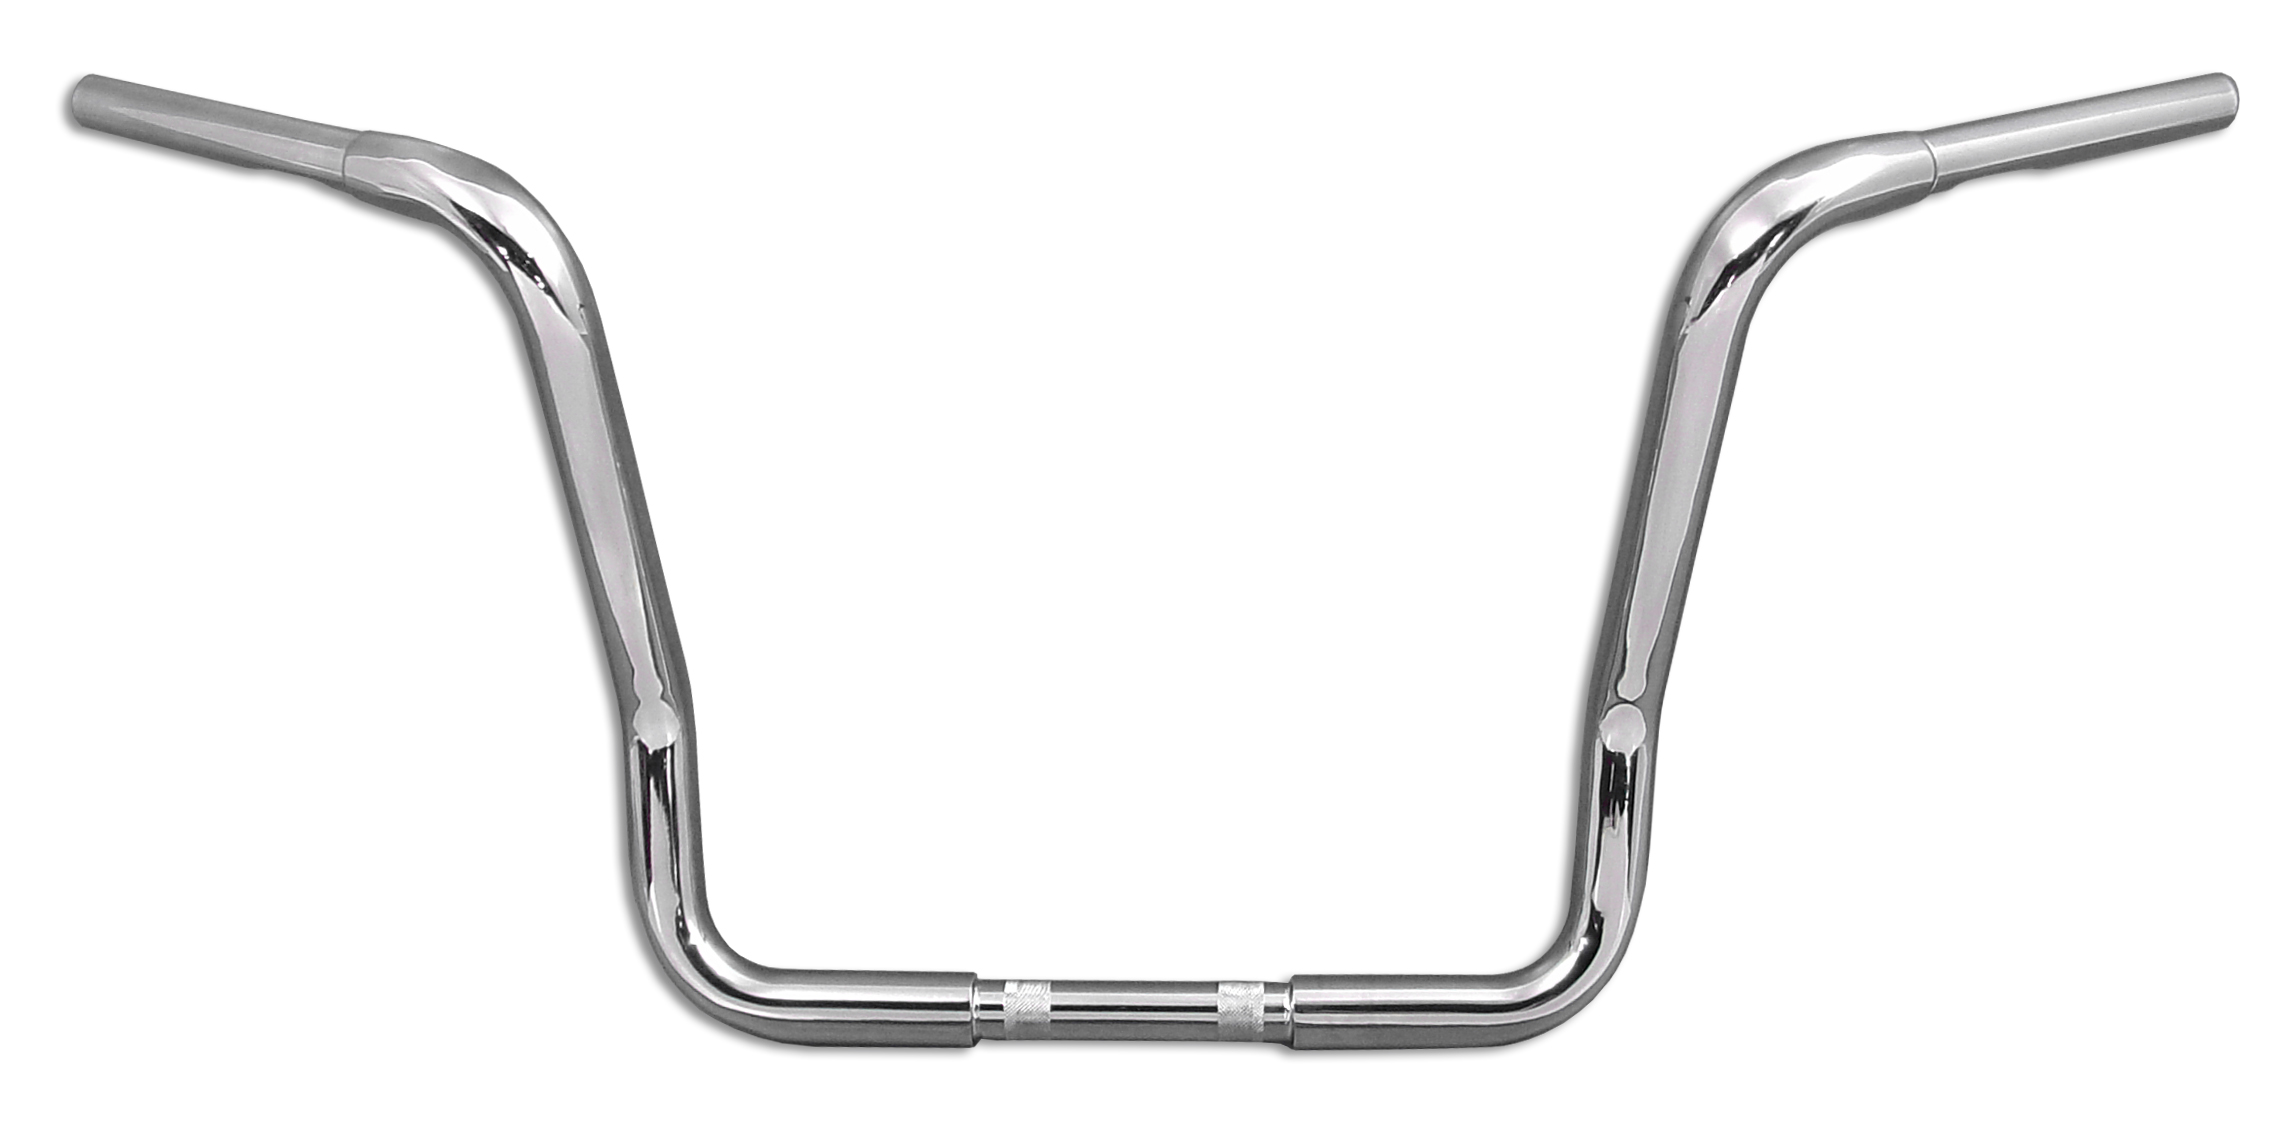 16" Bagger Handlebar with Indents